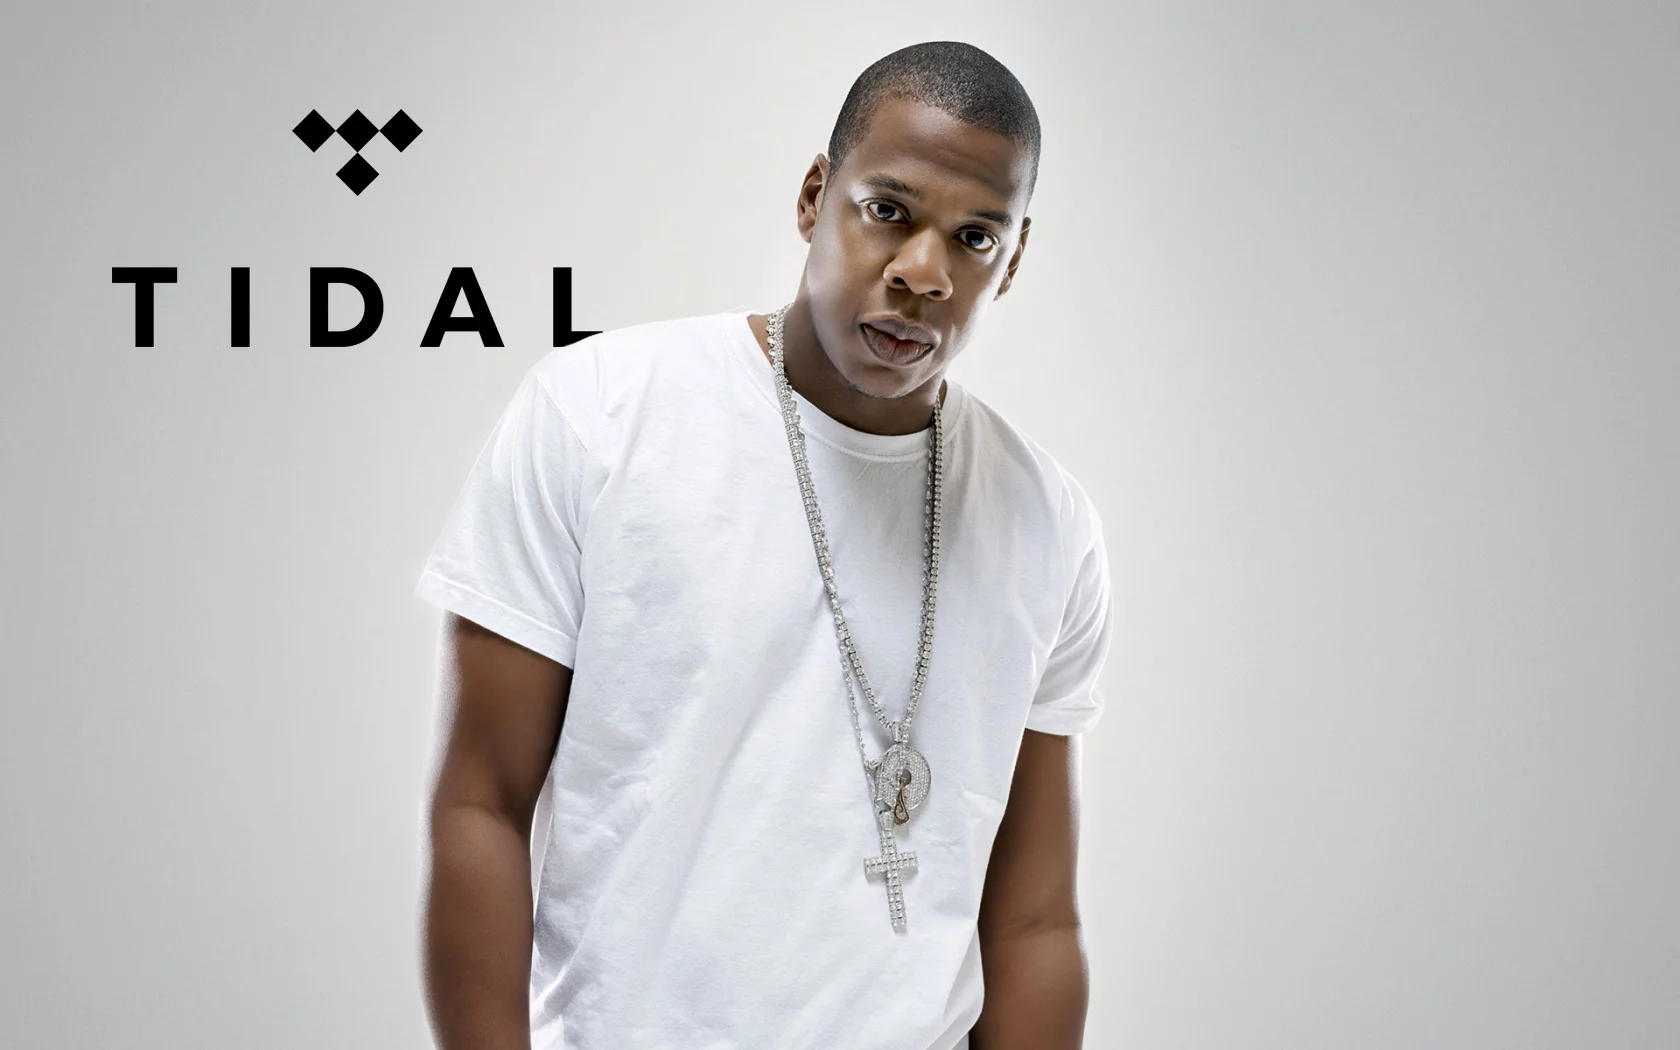 Jay-Z's net worth has jumped by 40 per cent following Tidal and